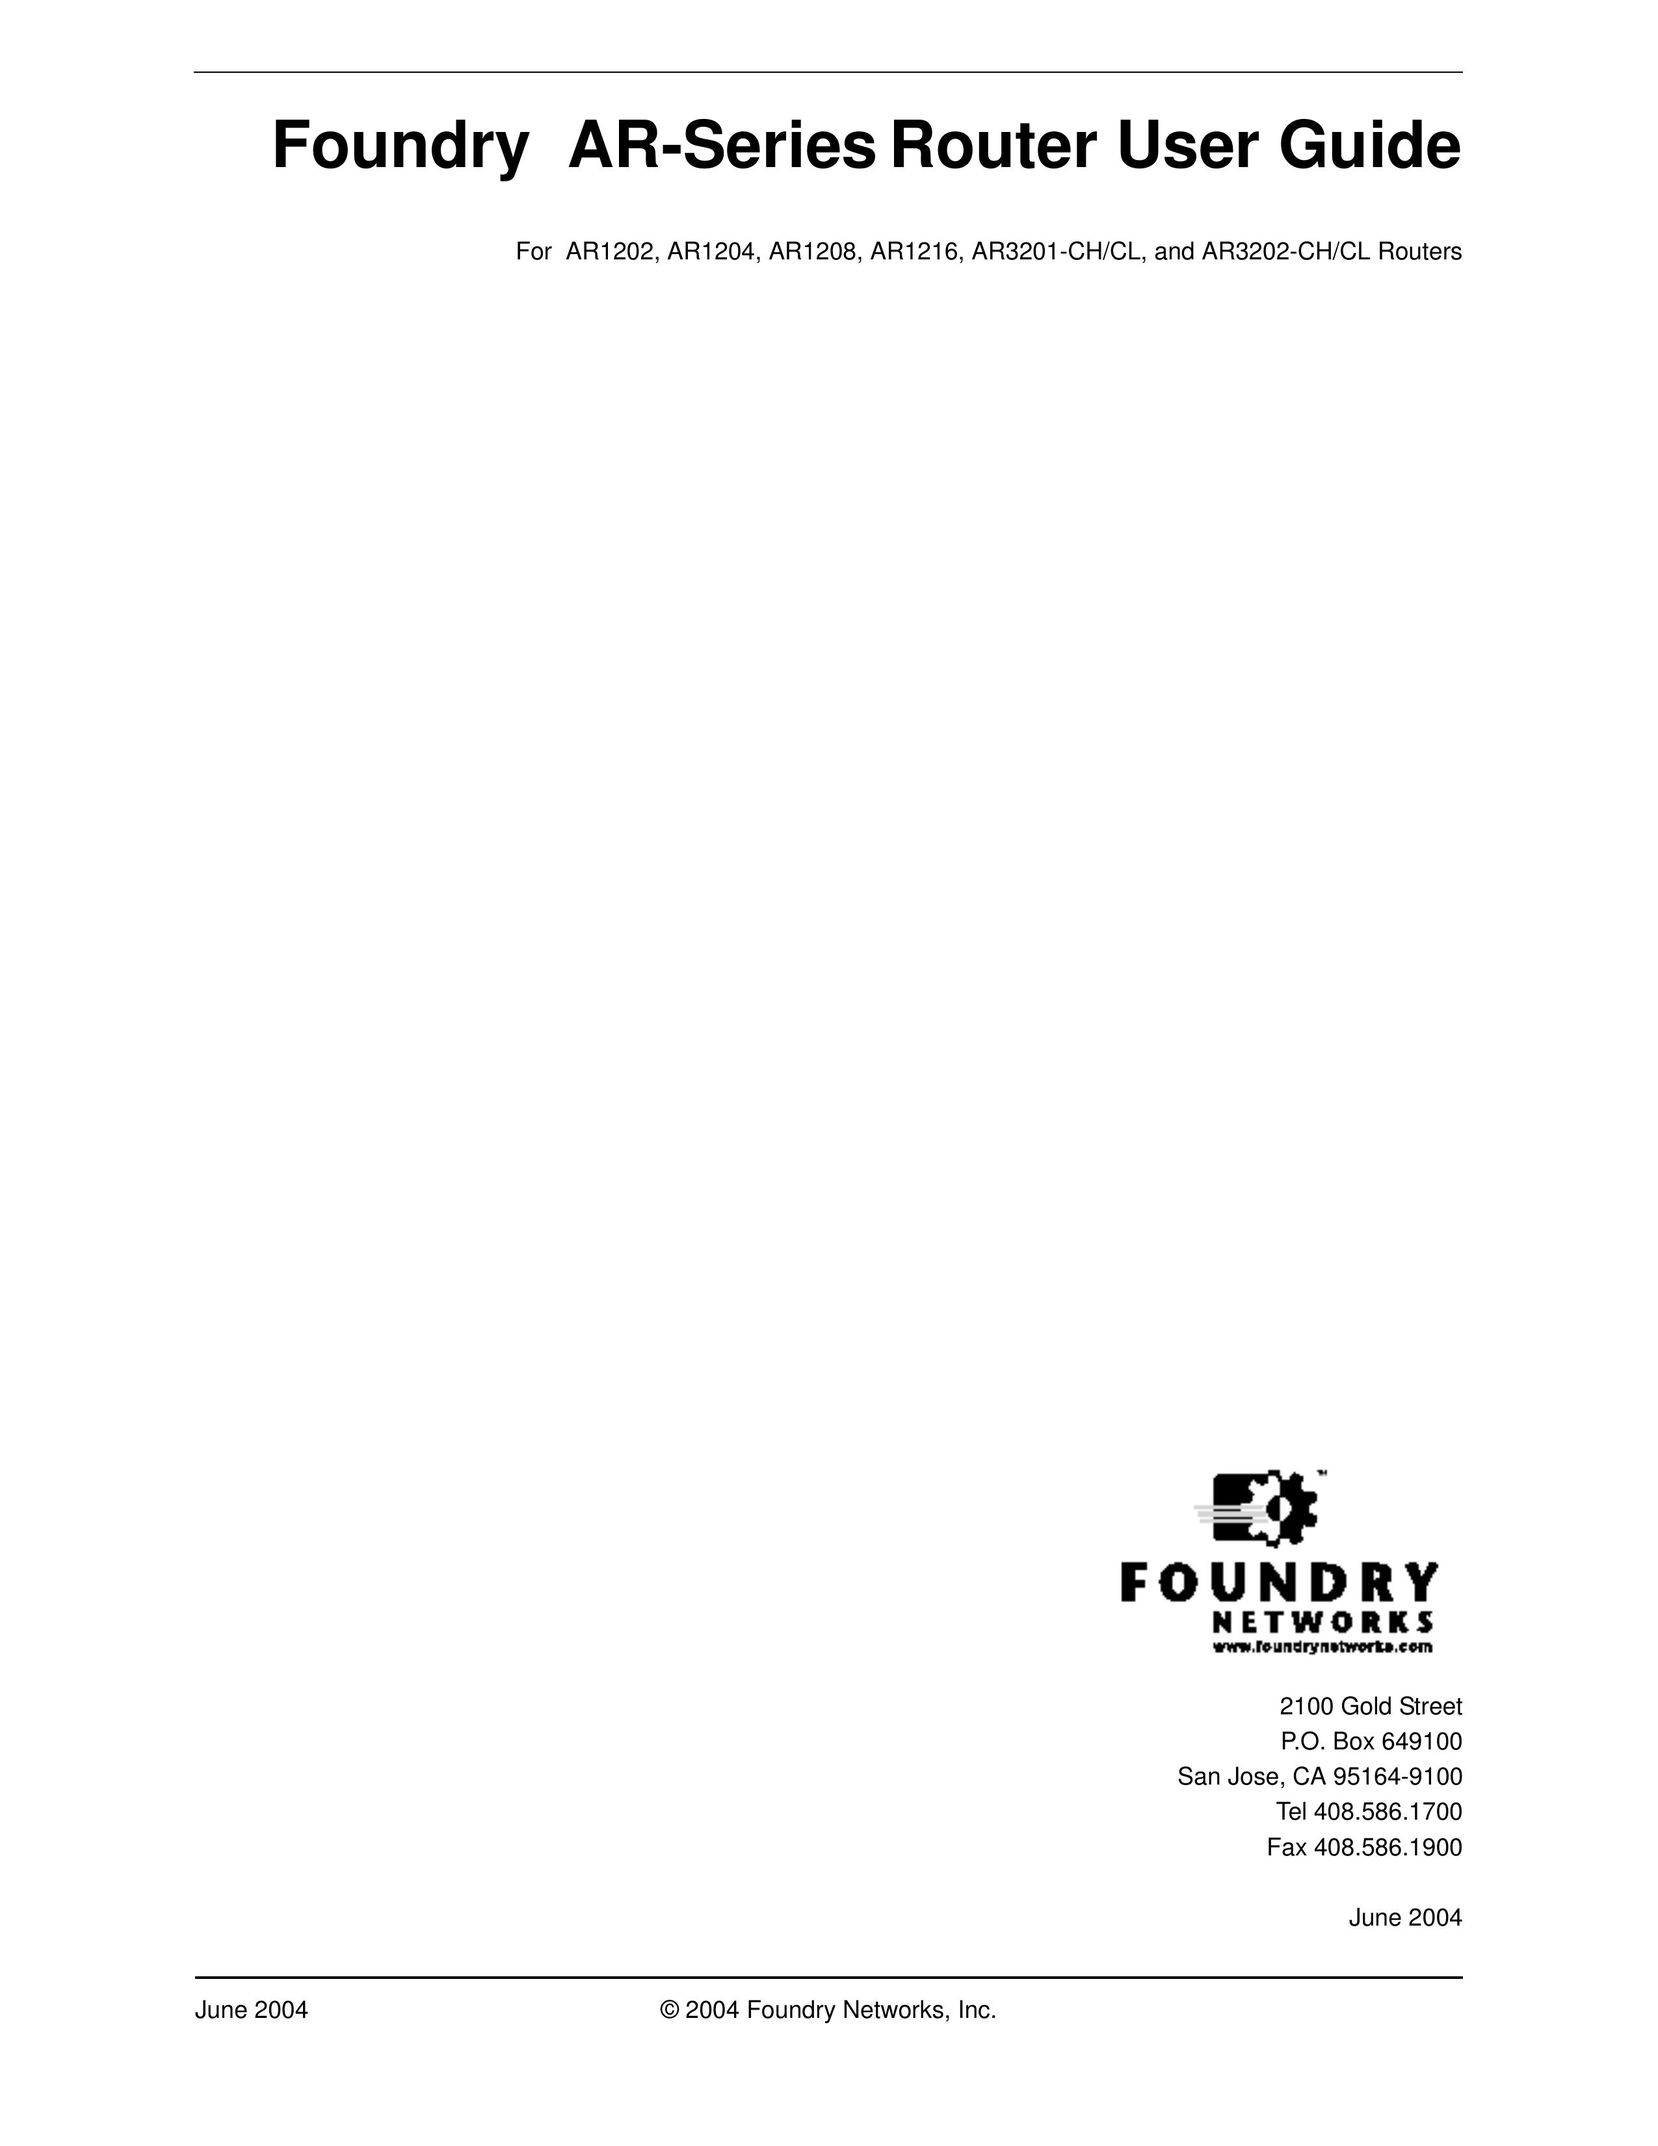 Foundry Networks AR3202-CL Network Router User Manual